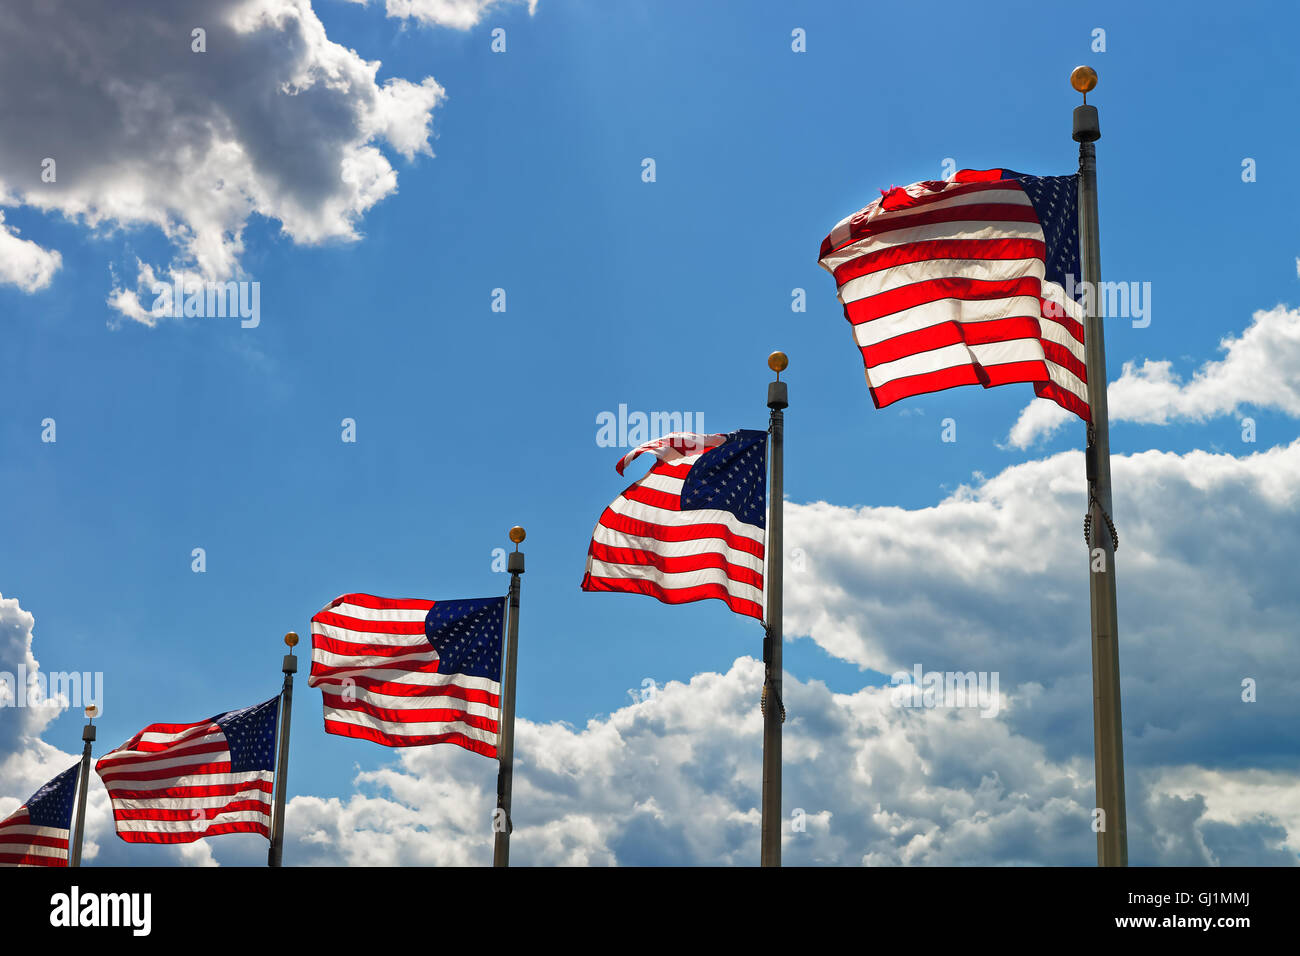 Flags Of The United States Of America With A Beautiful Sky In The